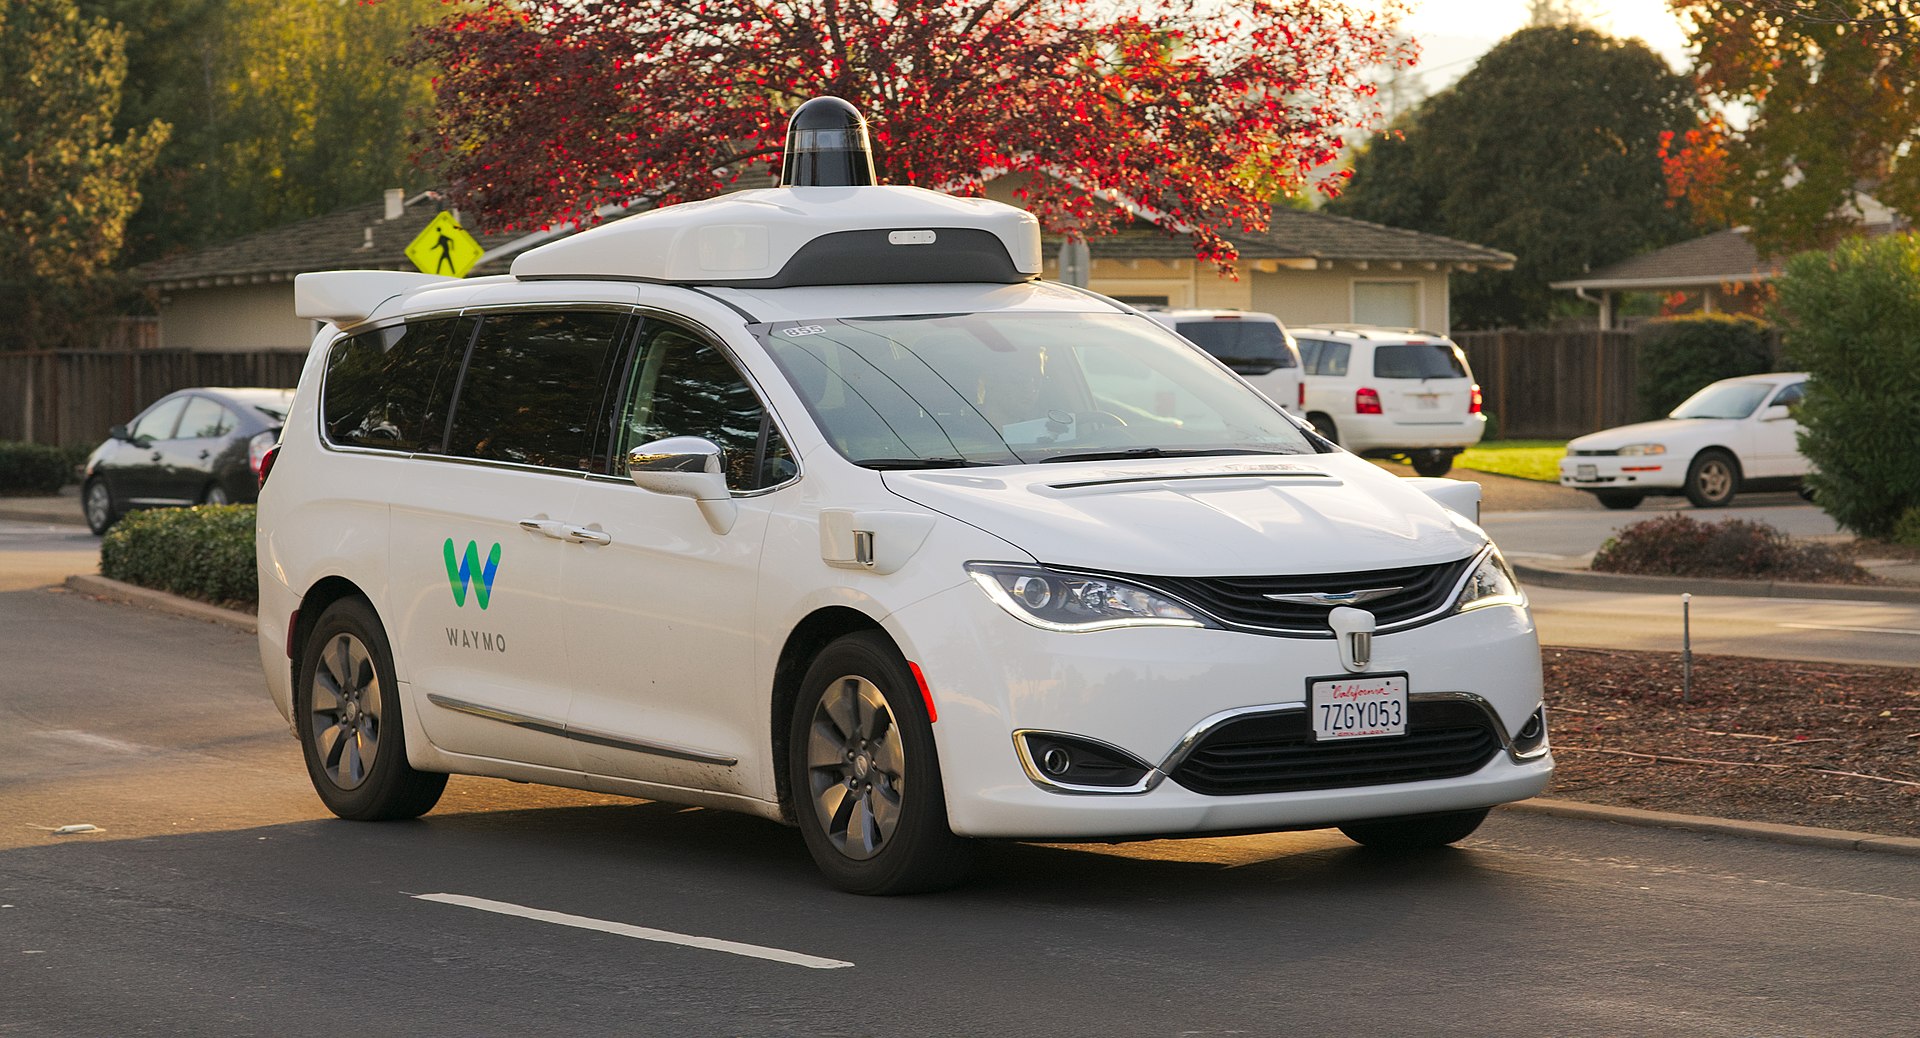 Waymo self-driving vehicles cover 20 mln miles on public roads